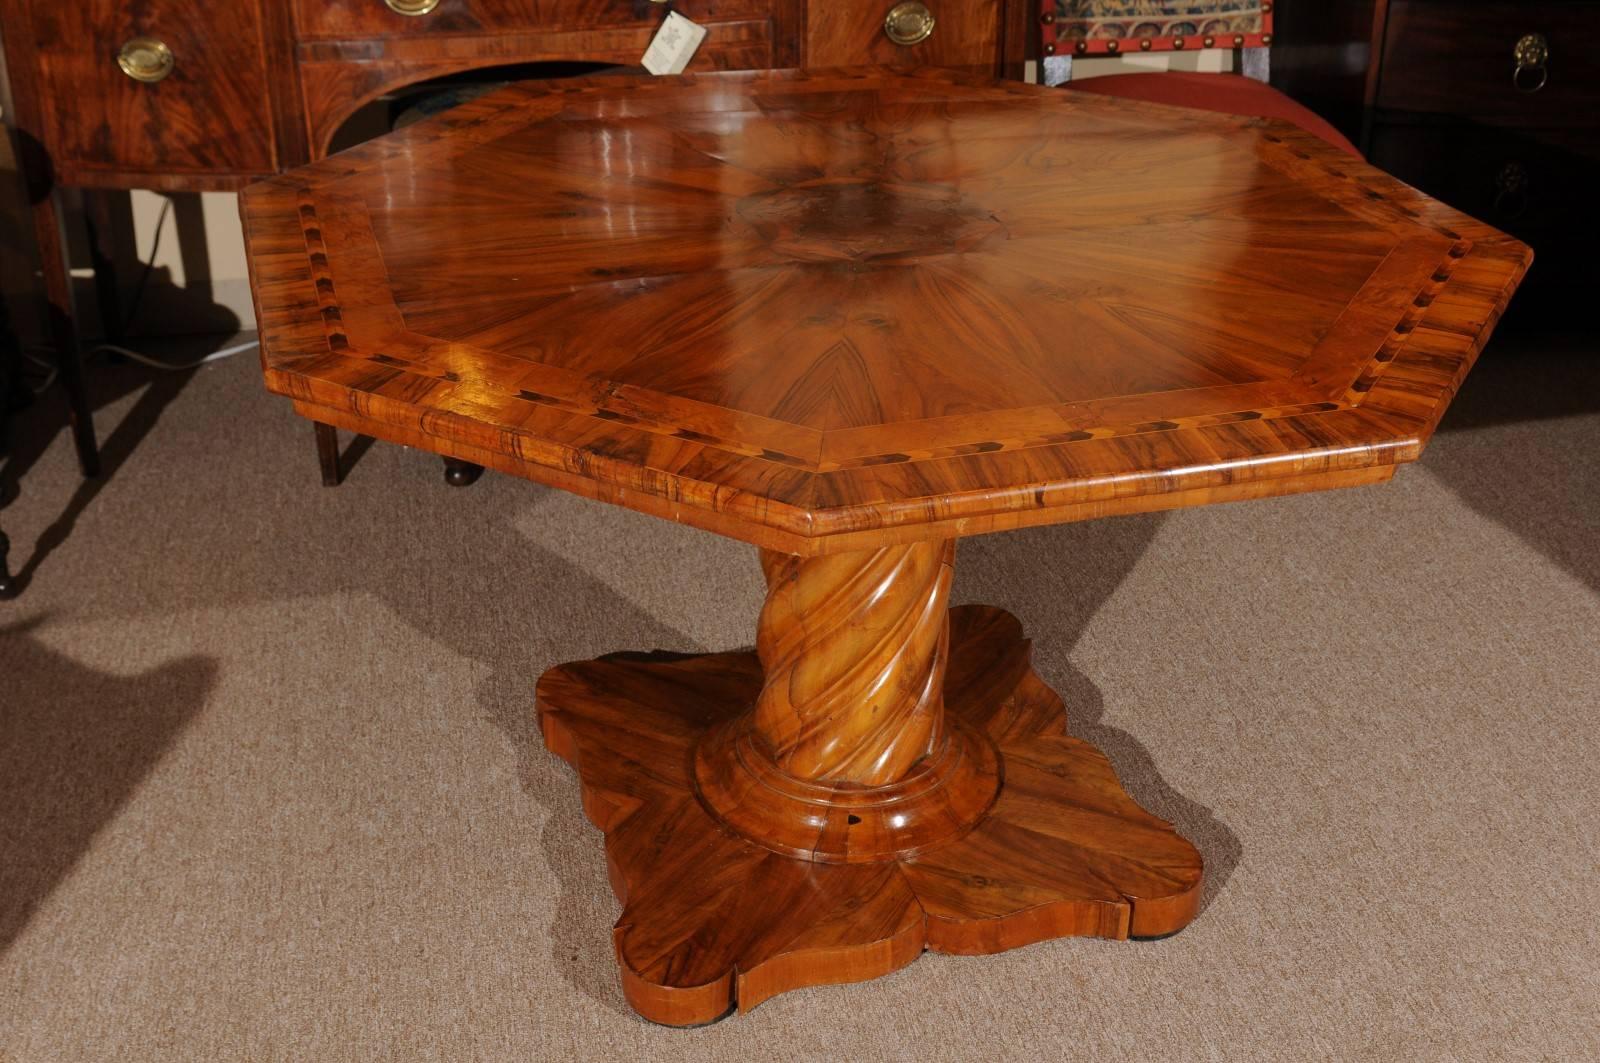 19th Century Italian Neoclassical Style Inlaid Walnut Center Table For Sale 4